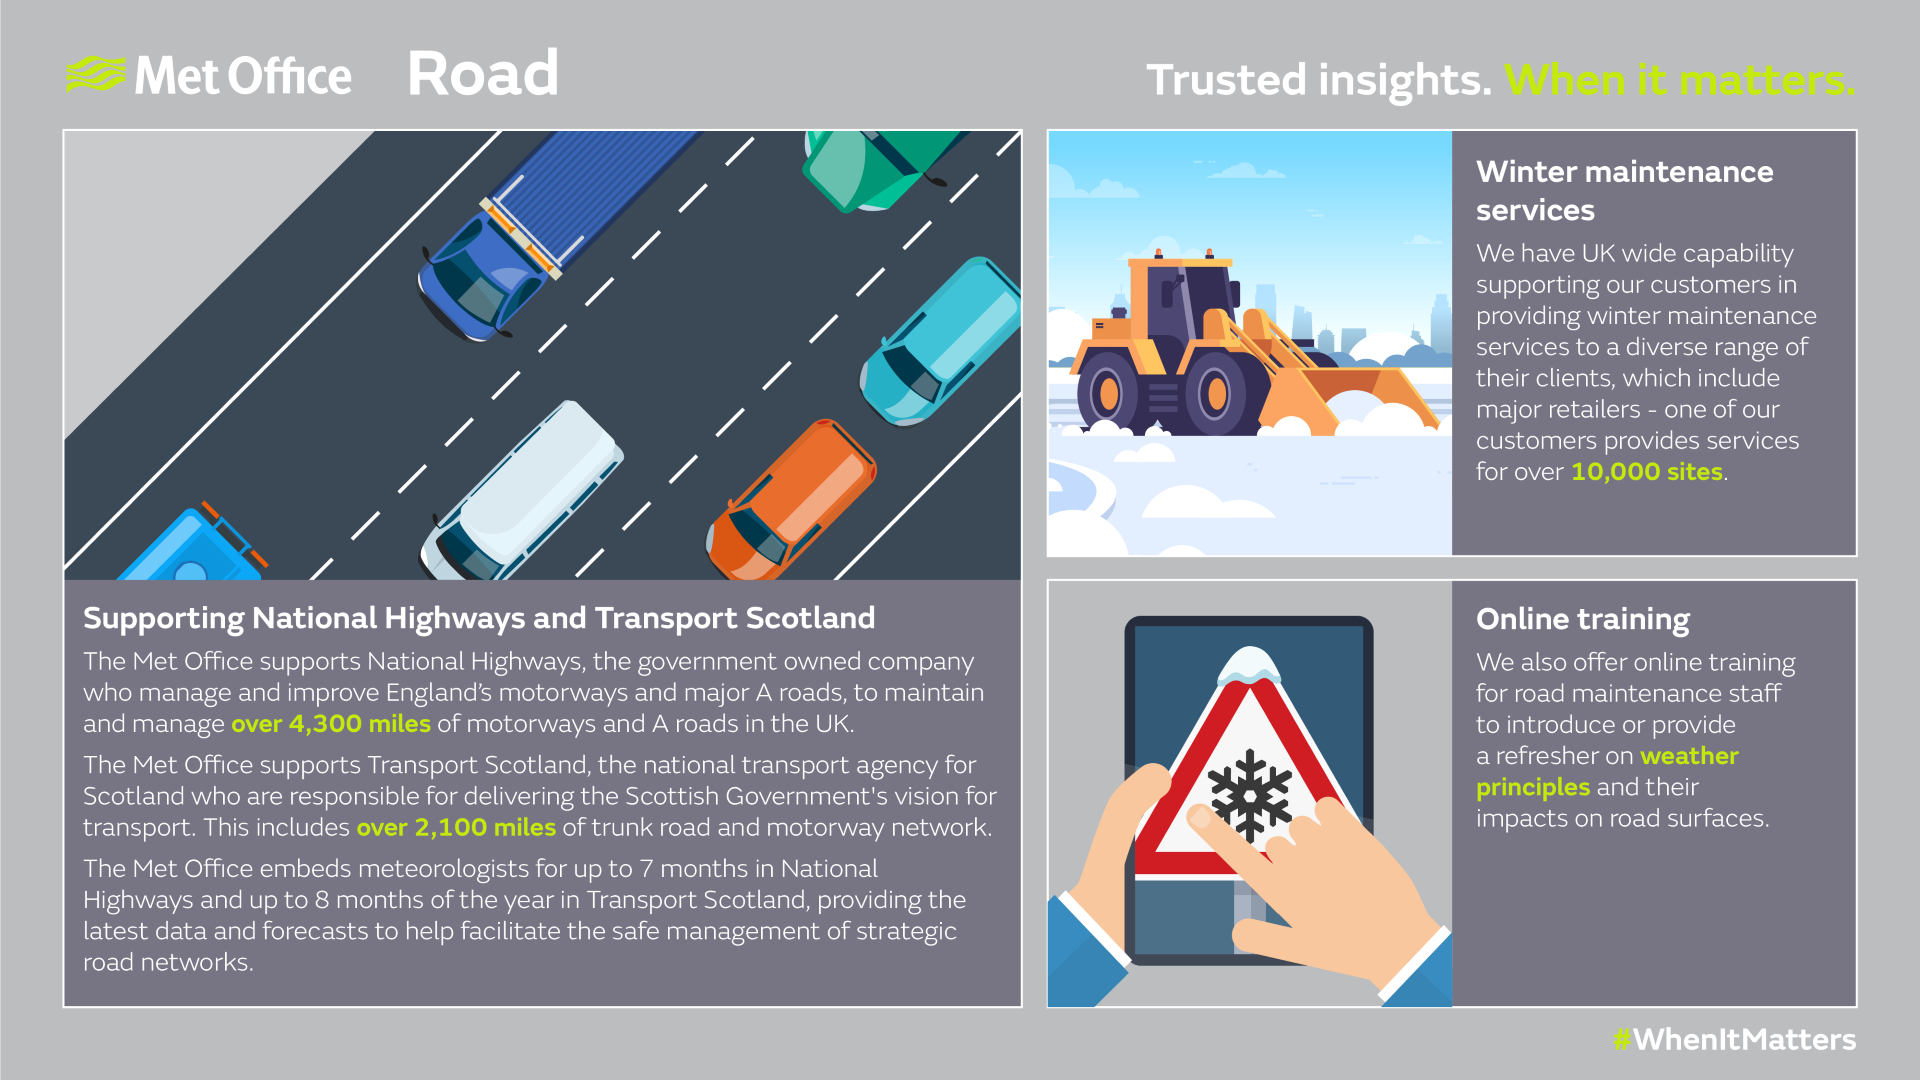 Met Office infographic for road services